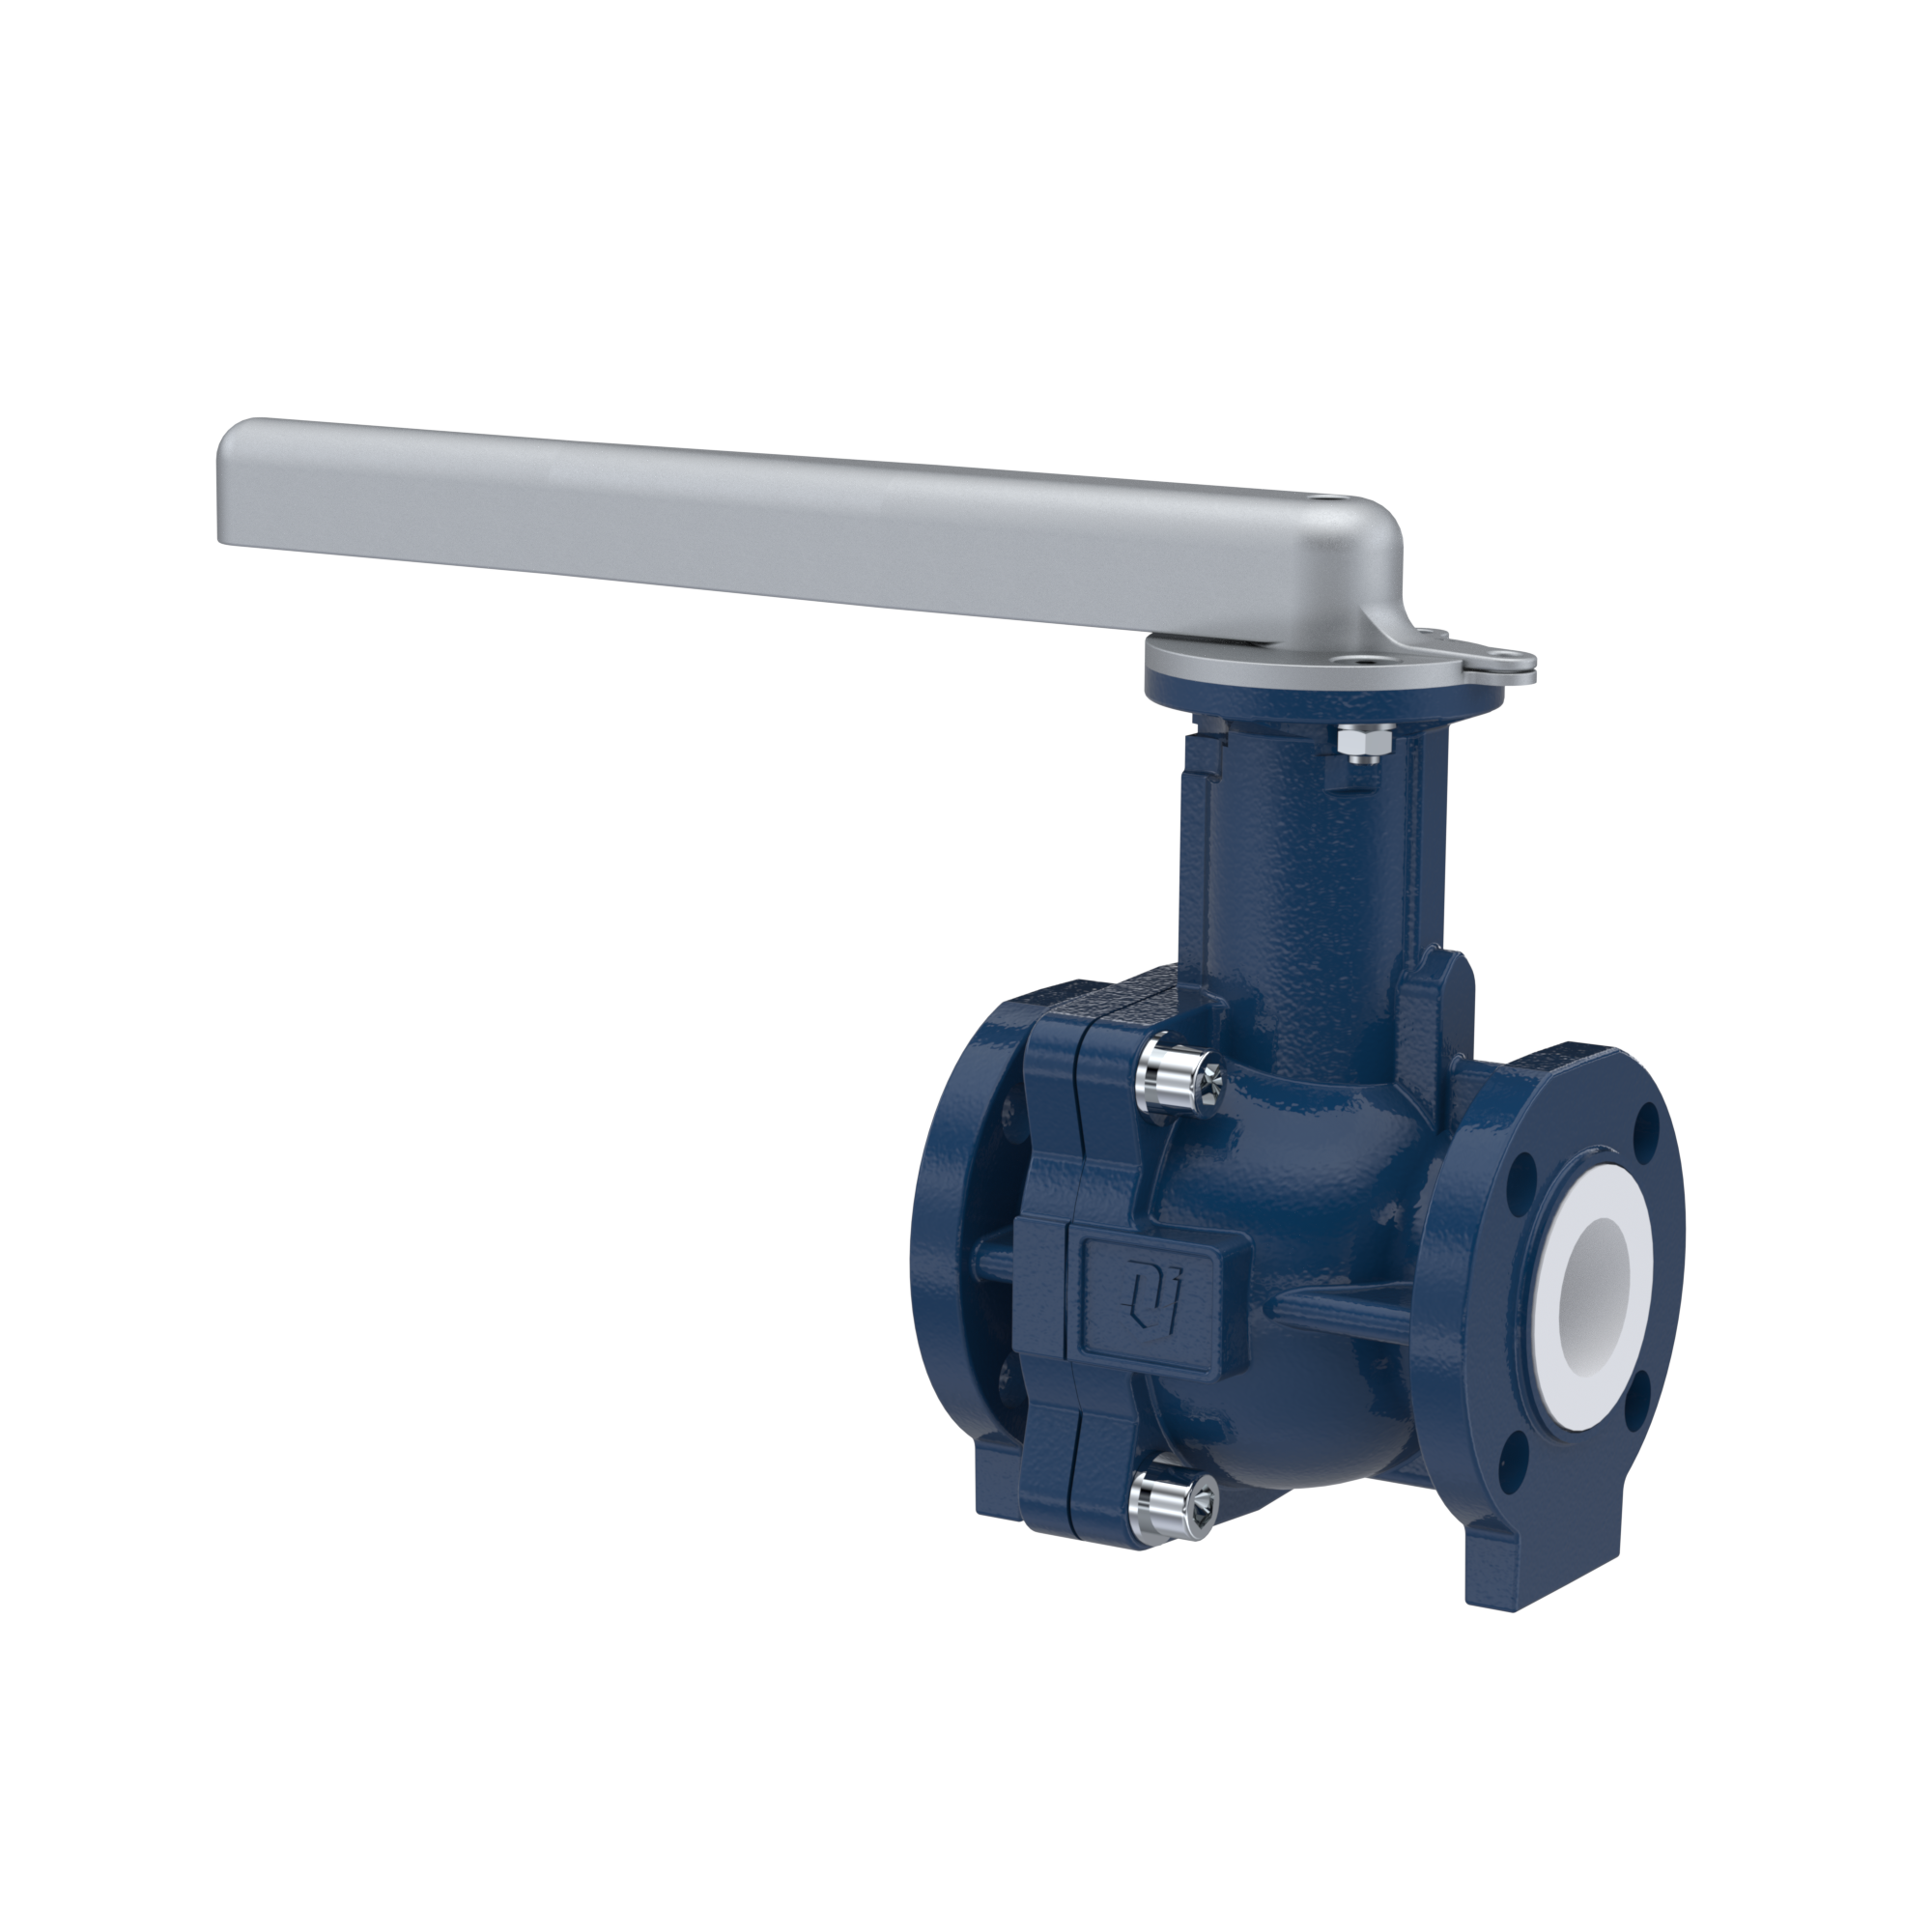 PFA-flange ball valve FK13 DN80 - 3" inch ANSI 150 made of spheroidal graphite cast iron with lever hand